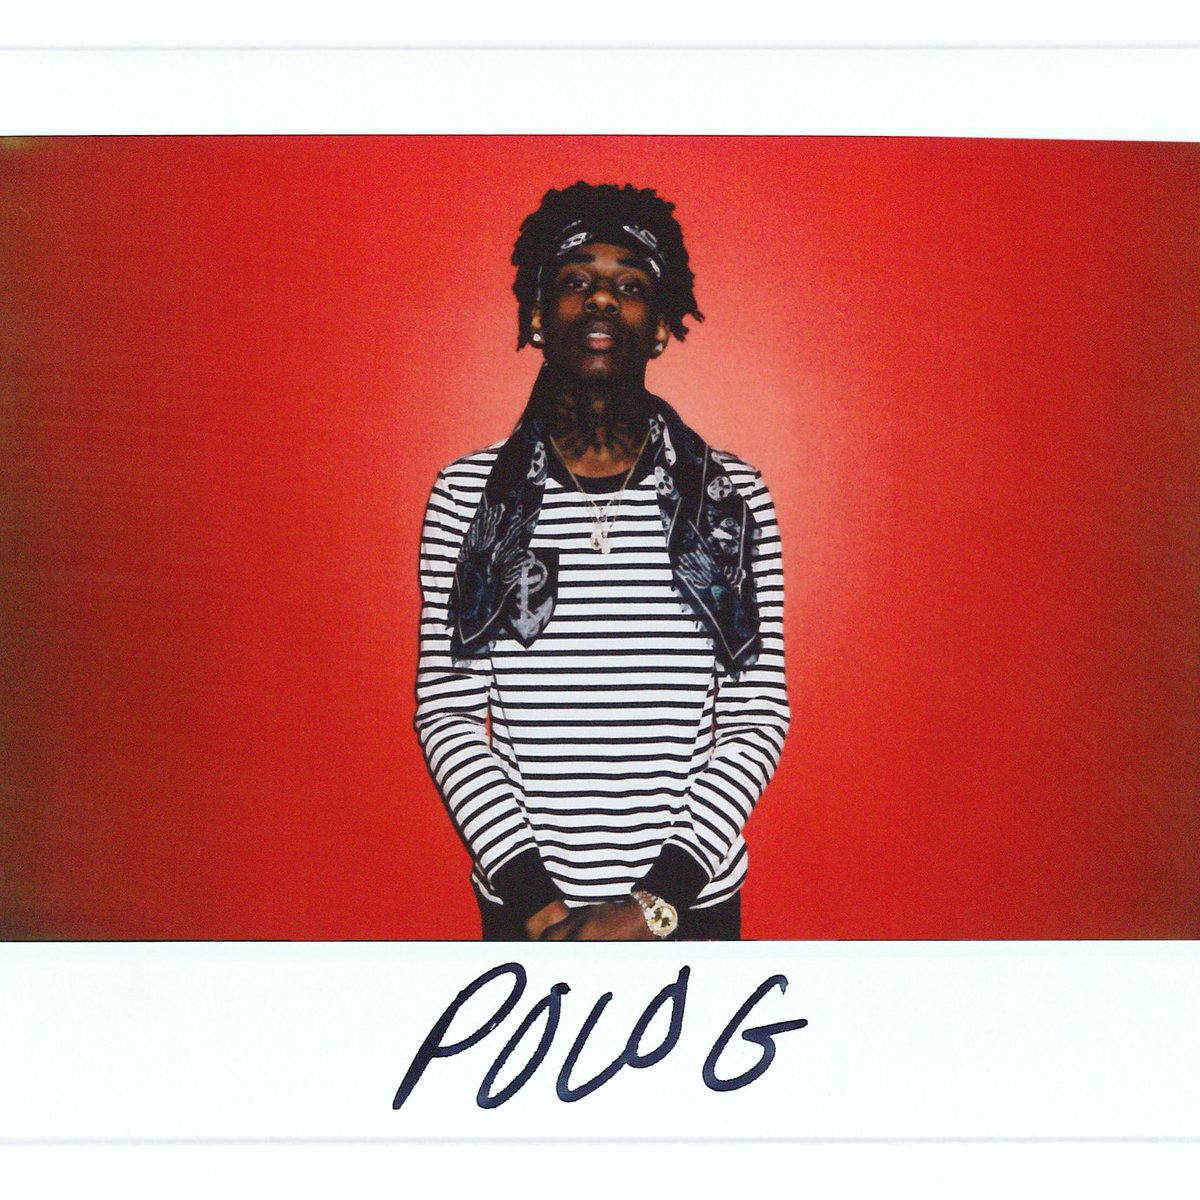 Polo G Wallpapers